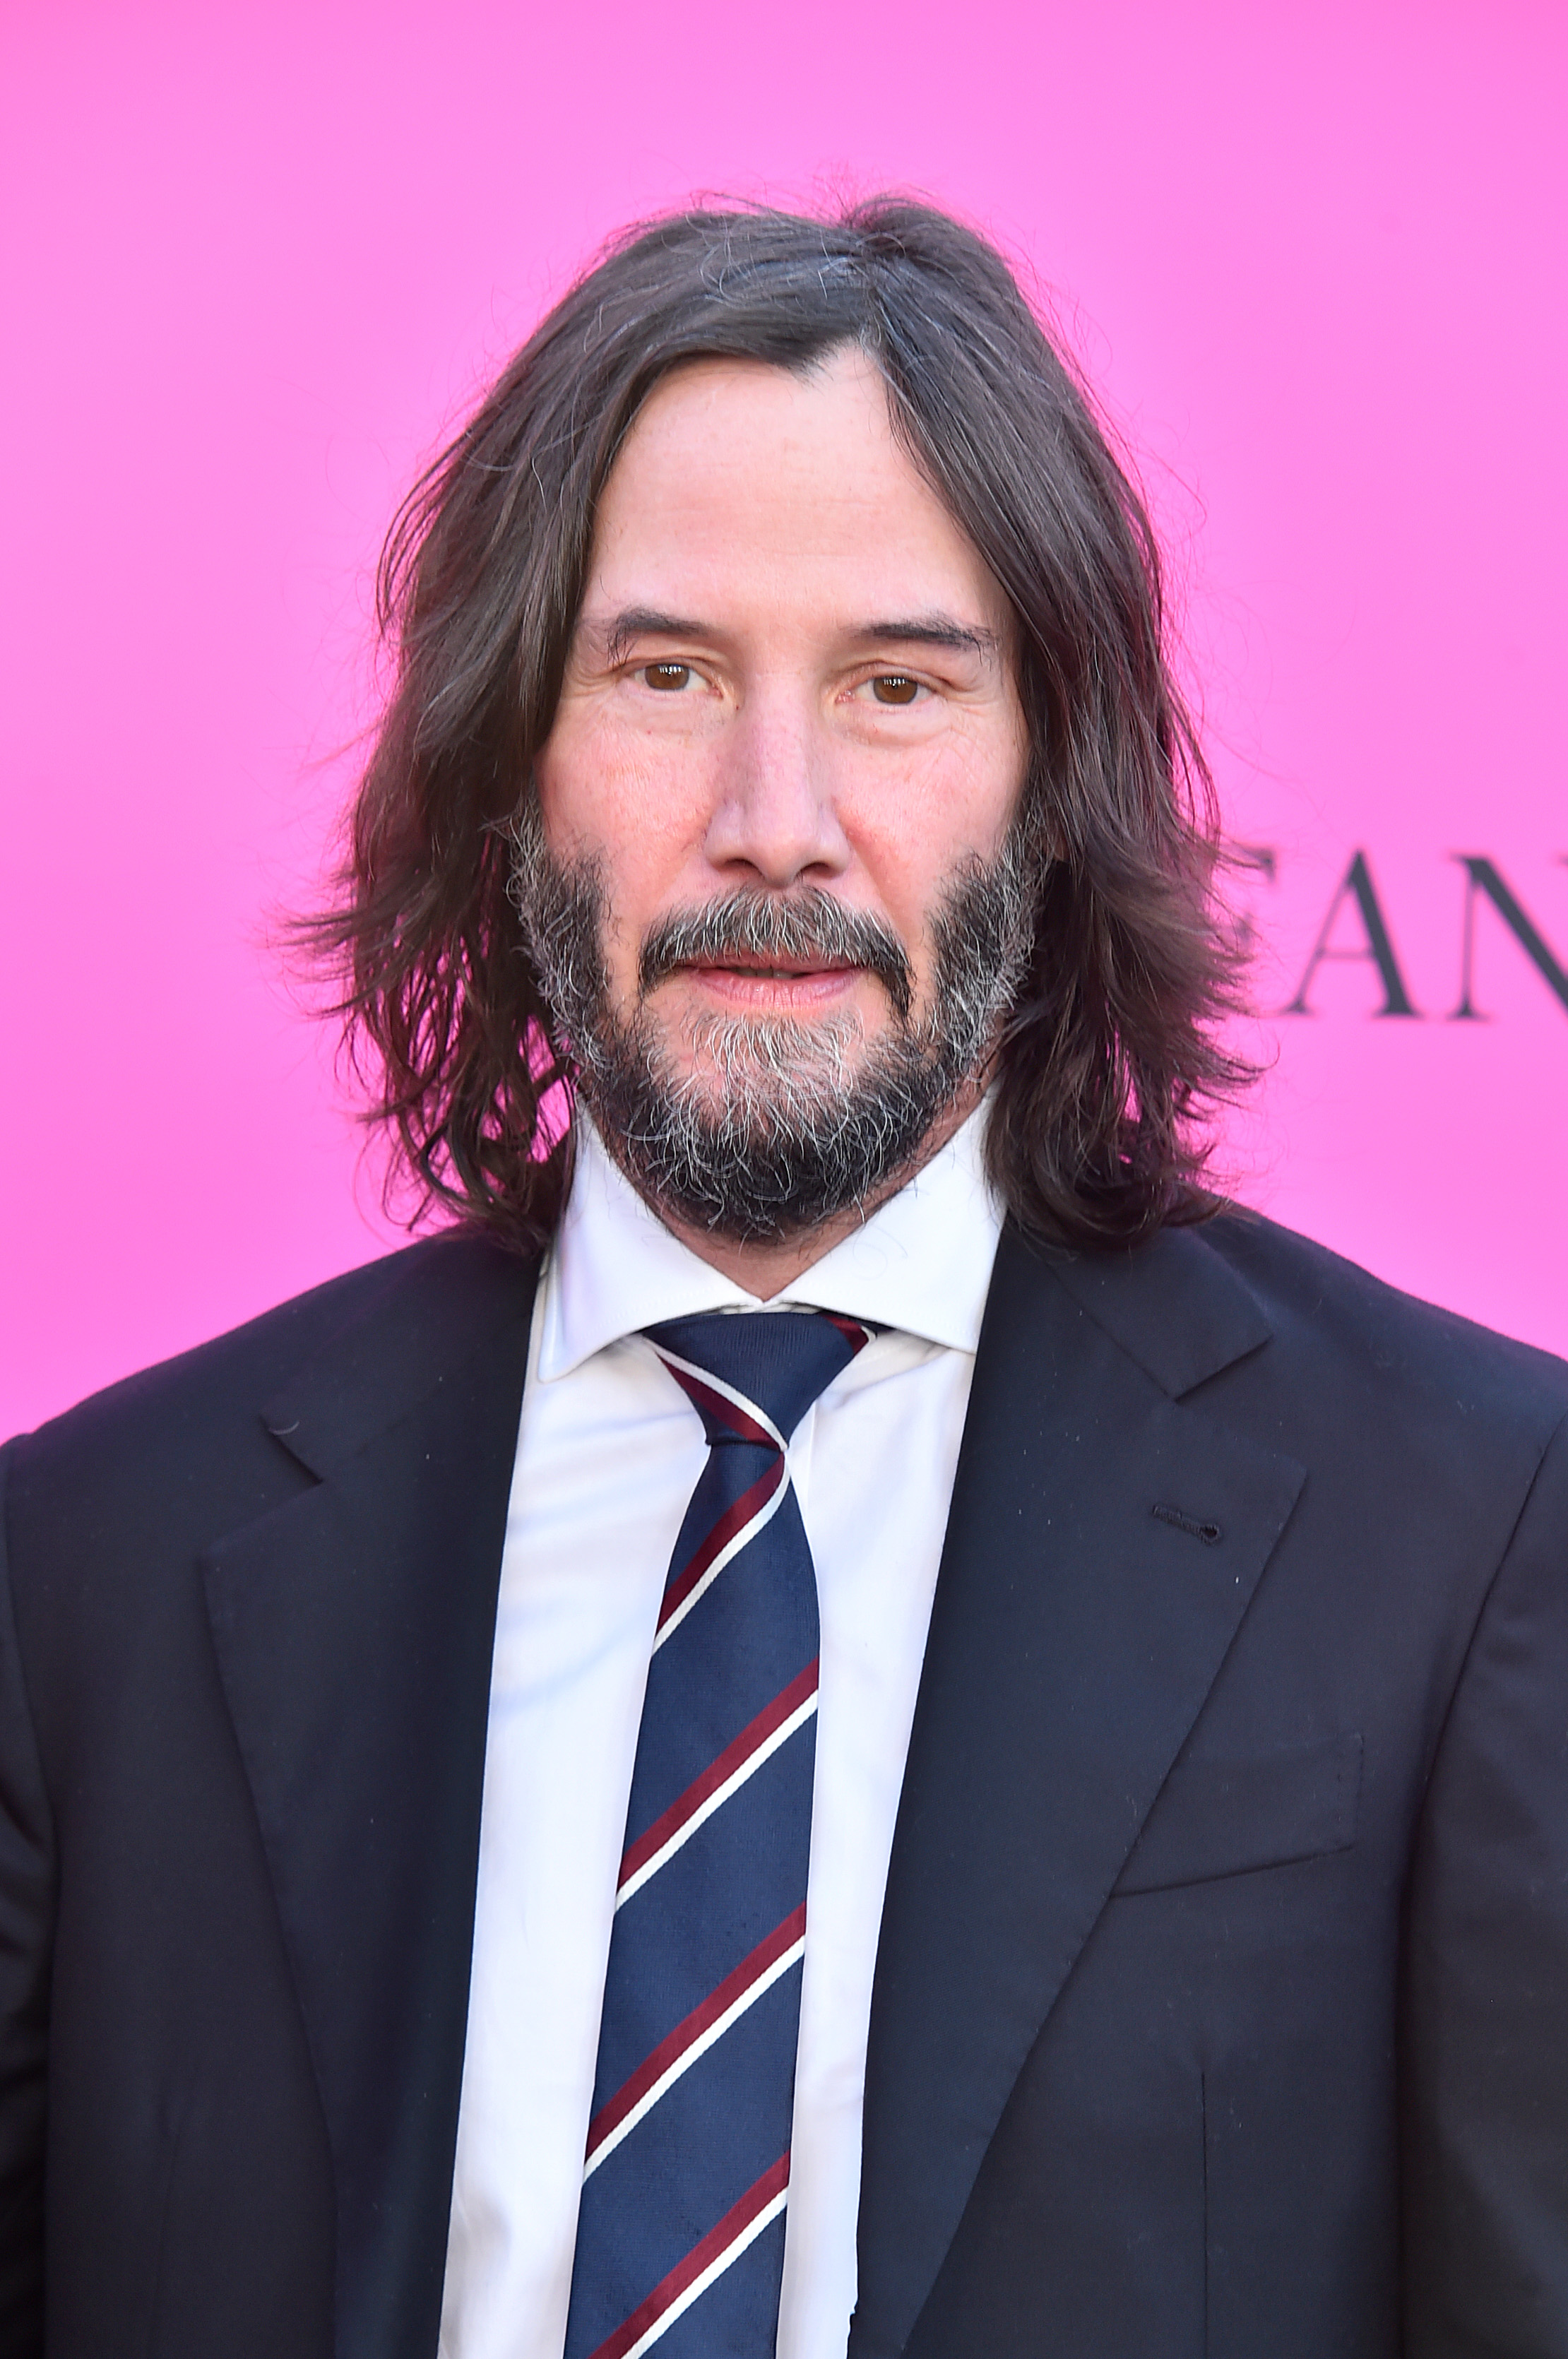 Keanu Reeves graces the MOCA Gala 2023, a star-studded event held at The Geffen Contemporary at MOCA on April 15, 2023, in the vibrant city of Los Angeles, California | Source: Getty Images